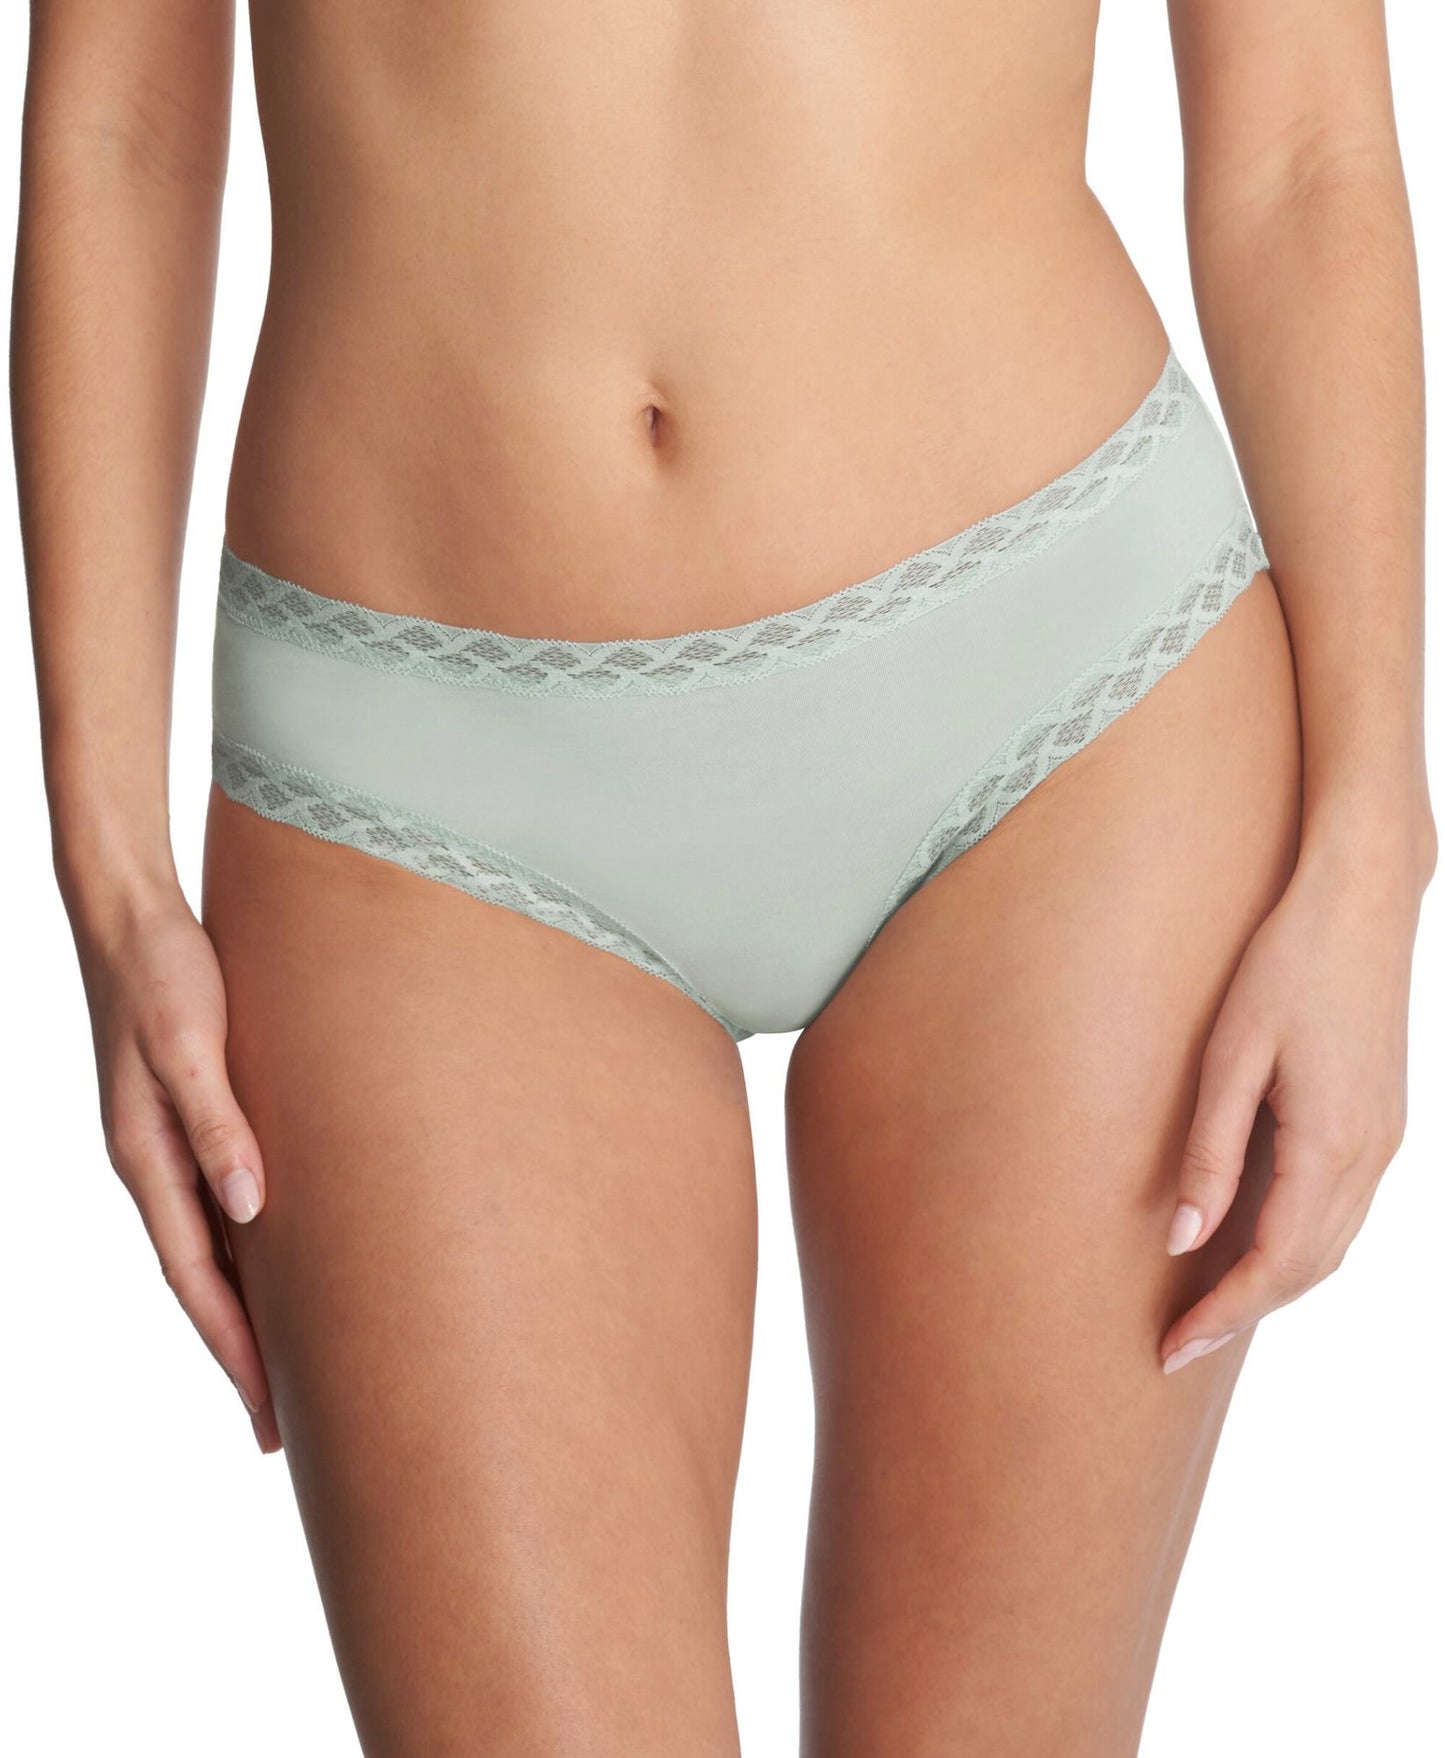 Bliss Girl brief - new spring color